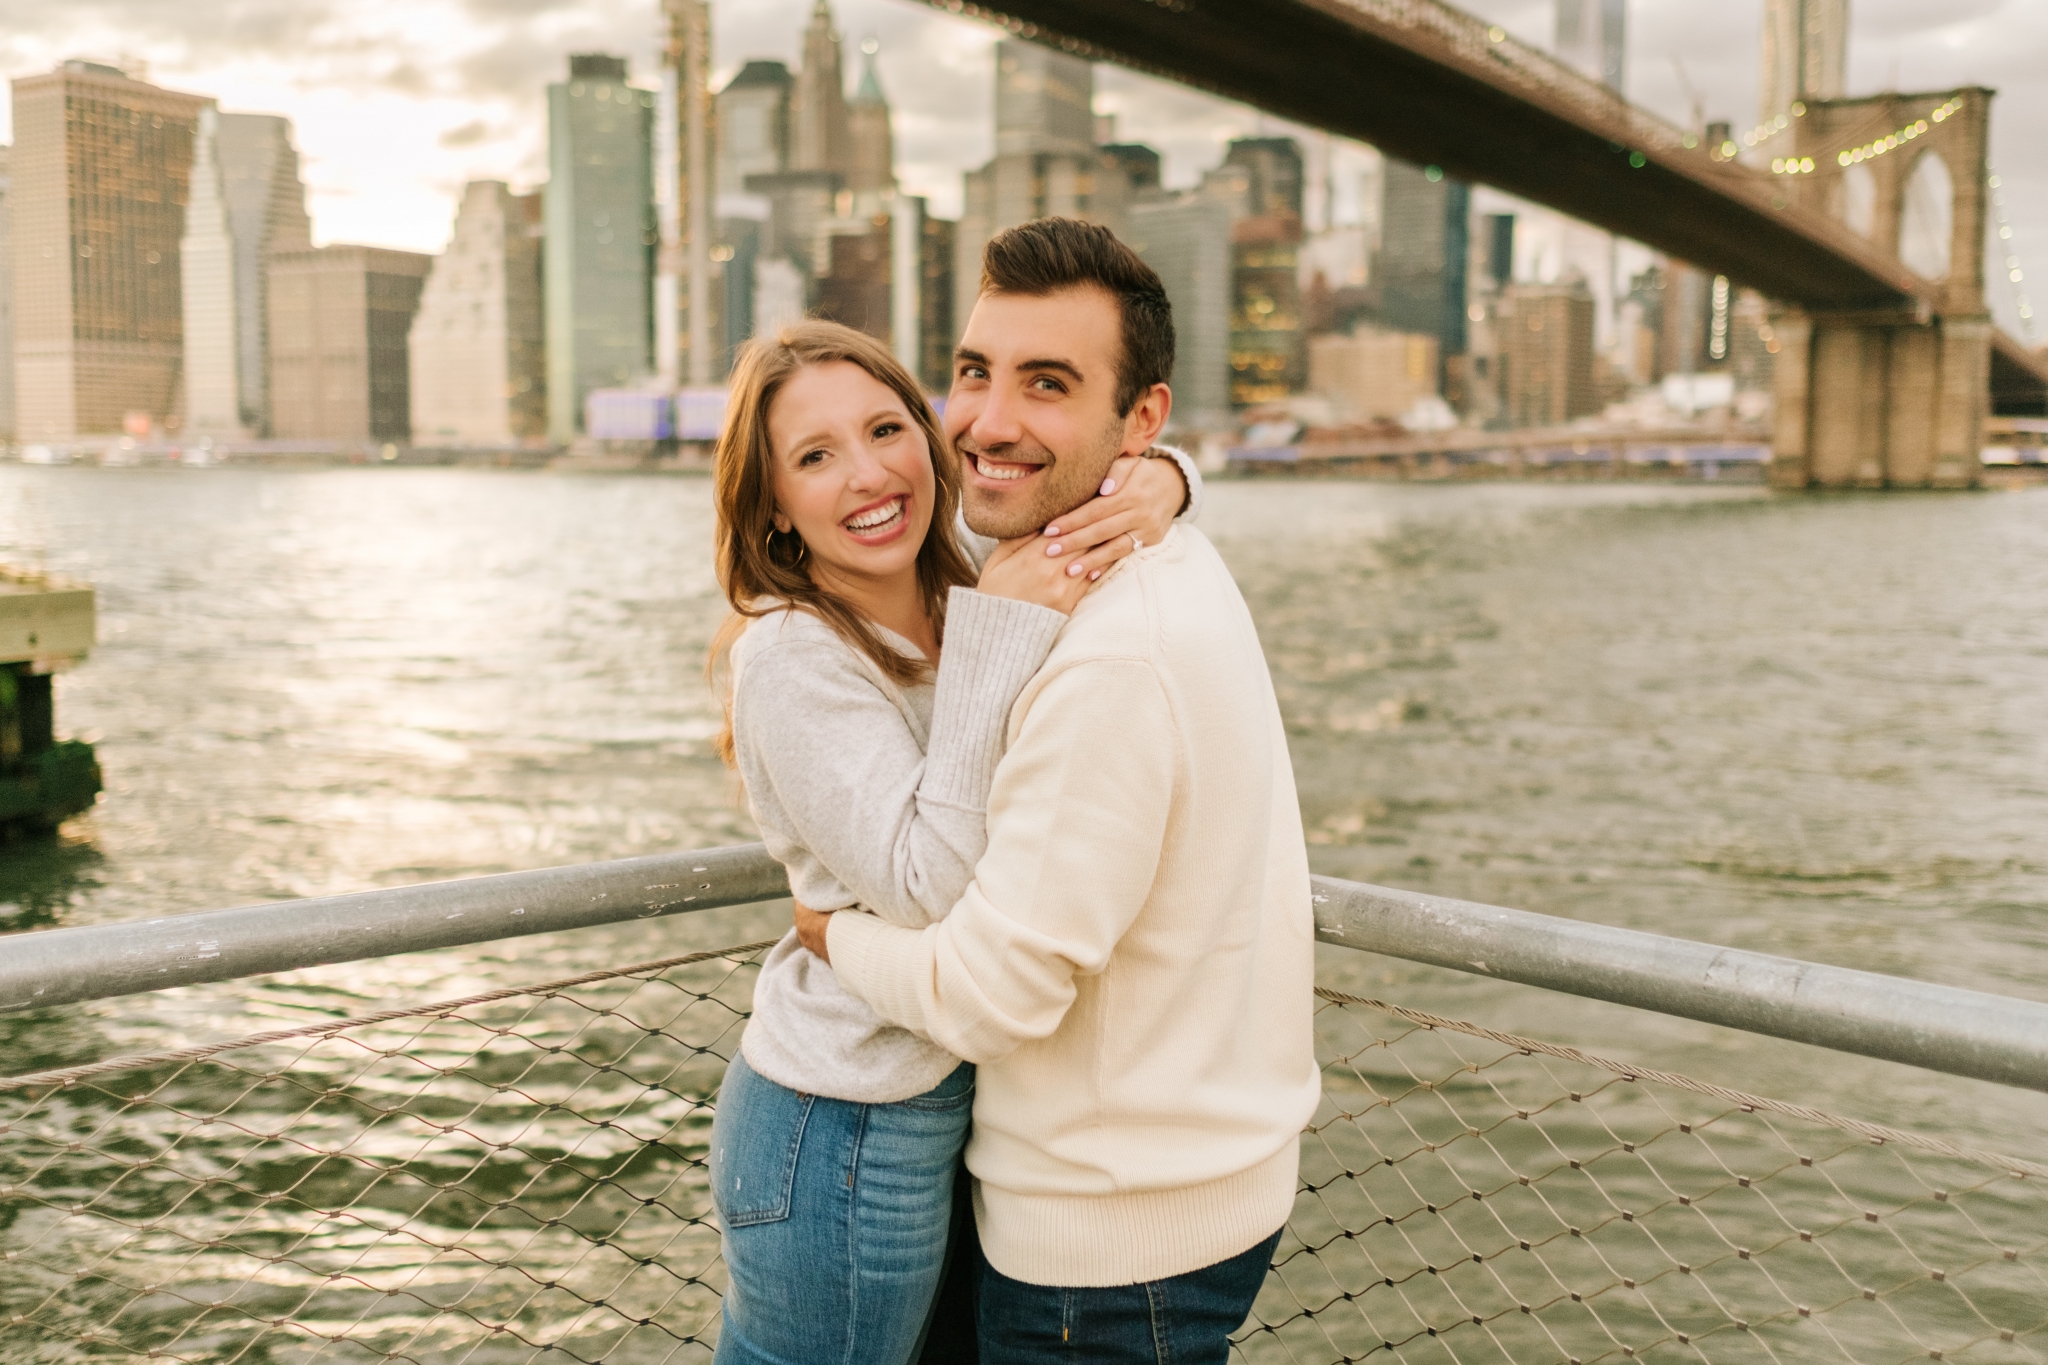 nyc wedding photographer captures engagement photos of a couple at Brooklyn Bridge Park overlooking the Manhattan skyline at Sunset